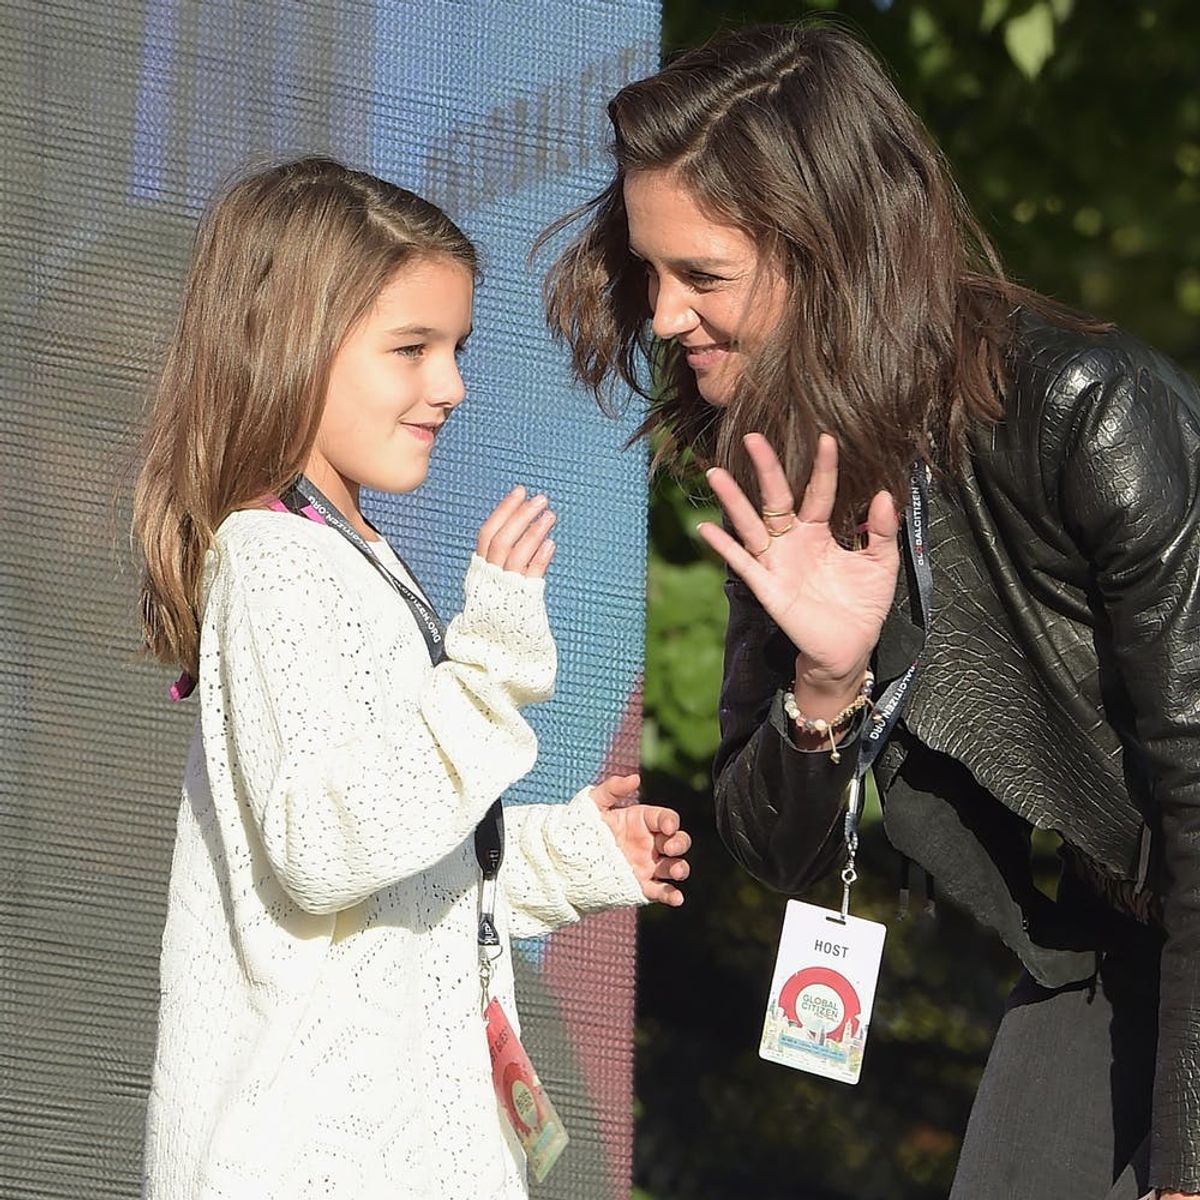 Suri Cruise Looks Just Like Mom Katie Holmes in This Photo